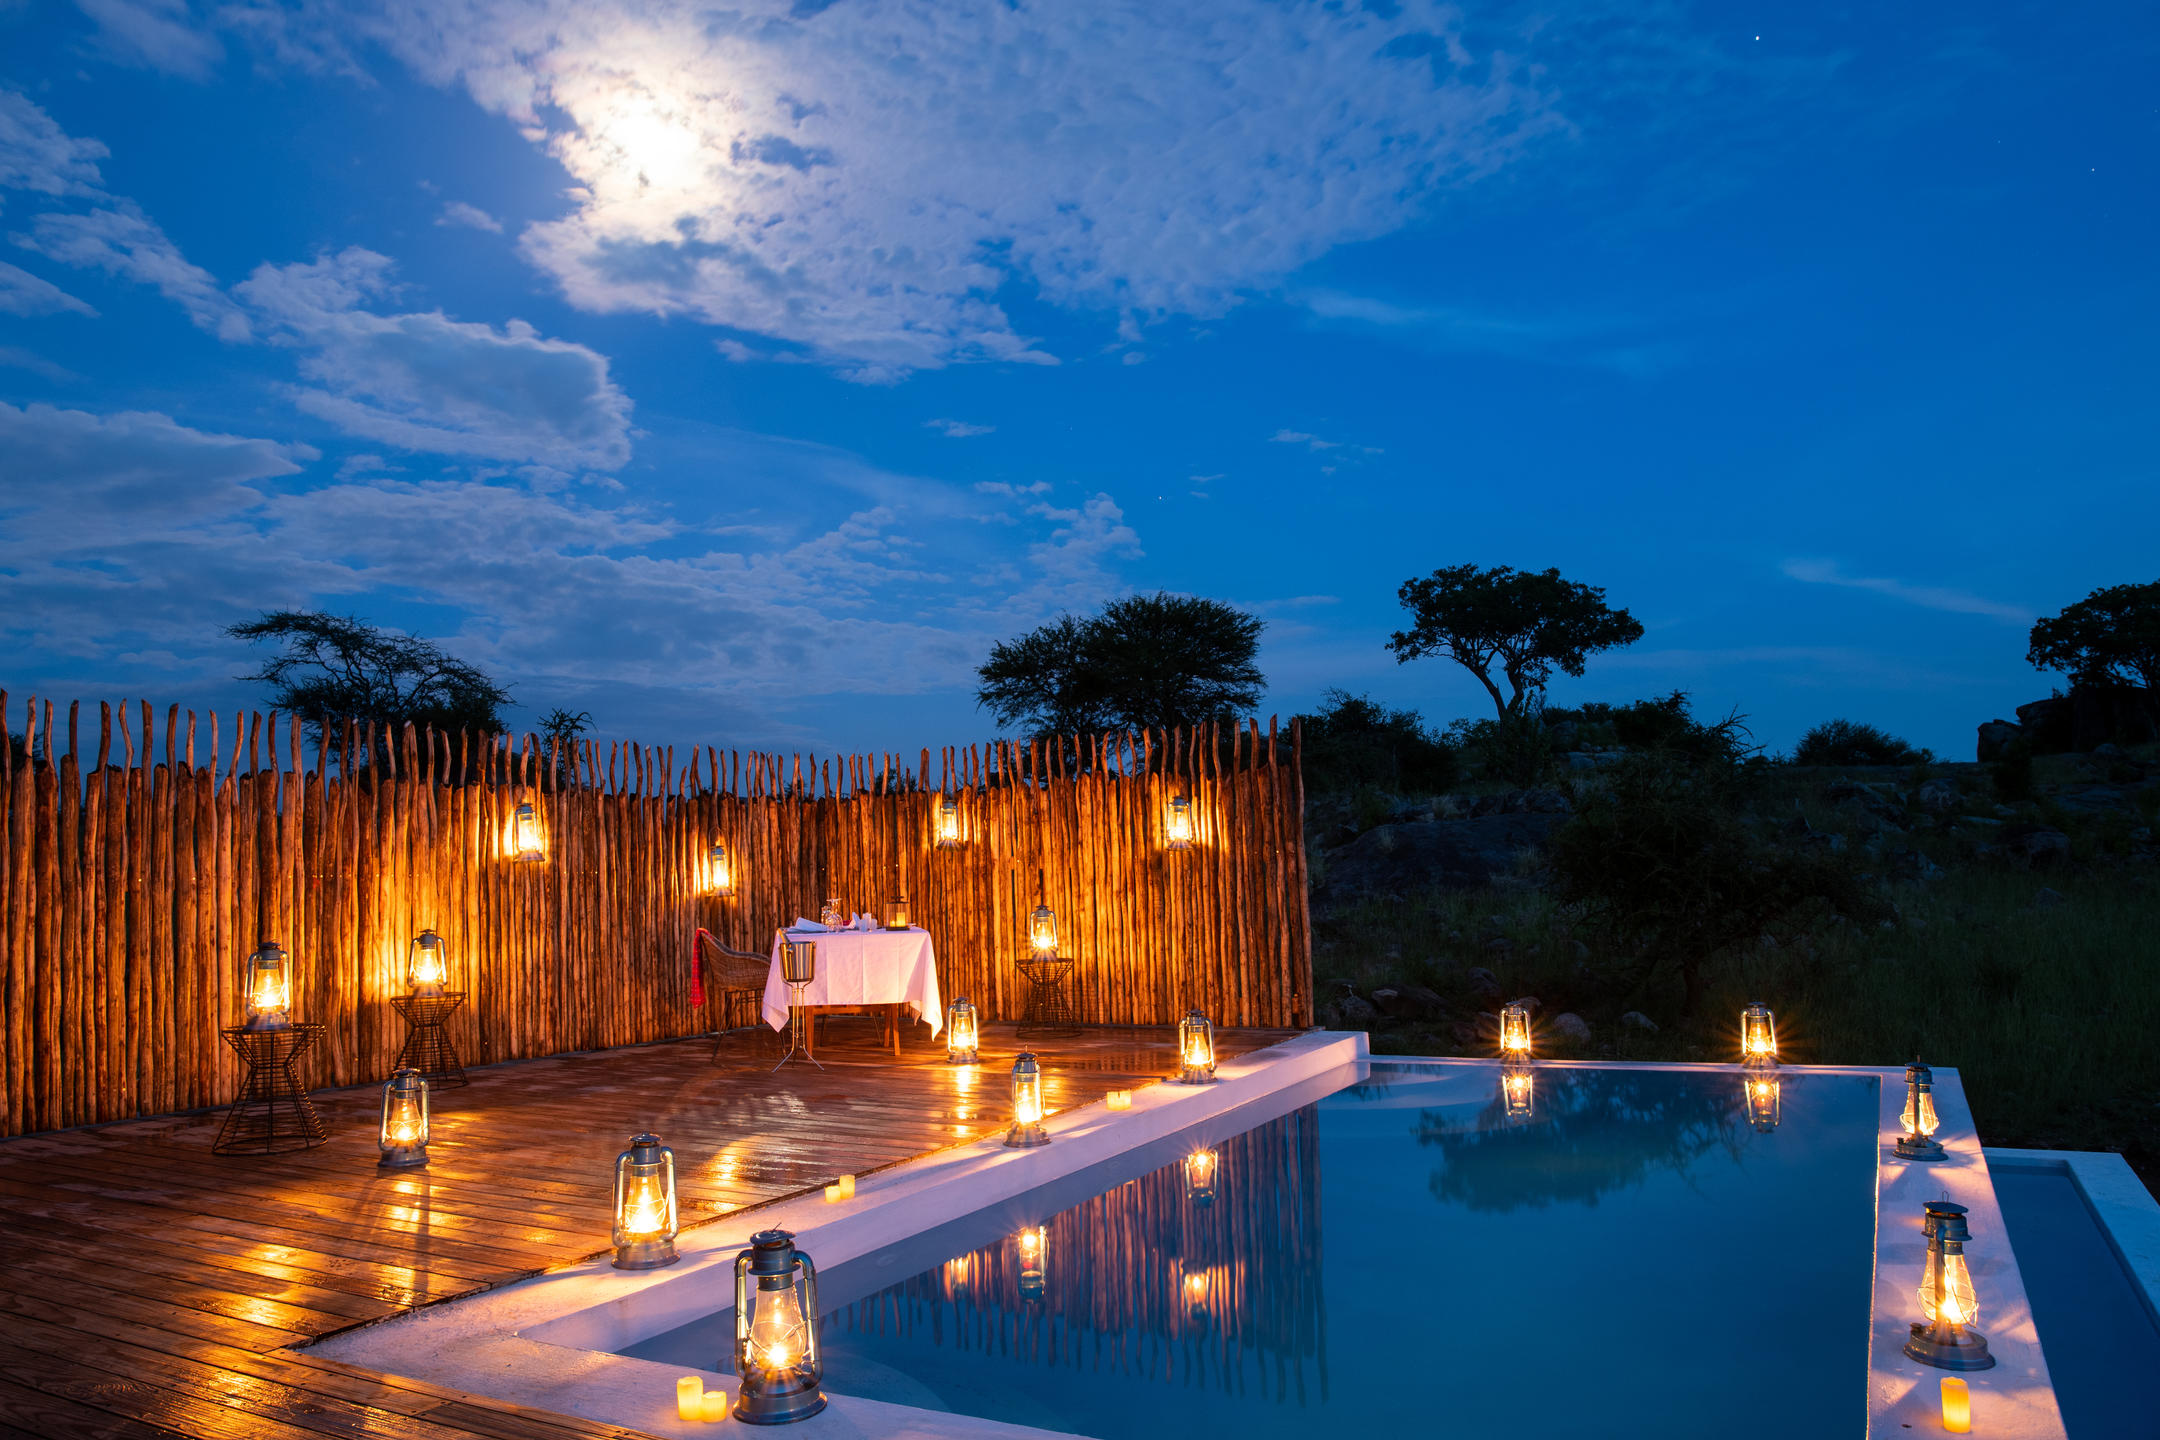 A view of the pool at the Lemala Nanyukie Lodge at night